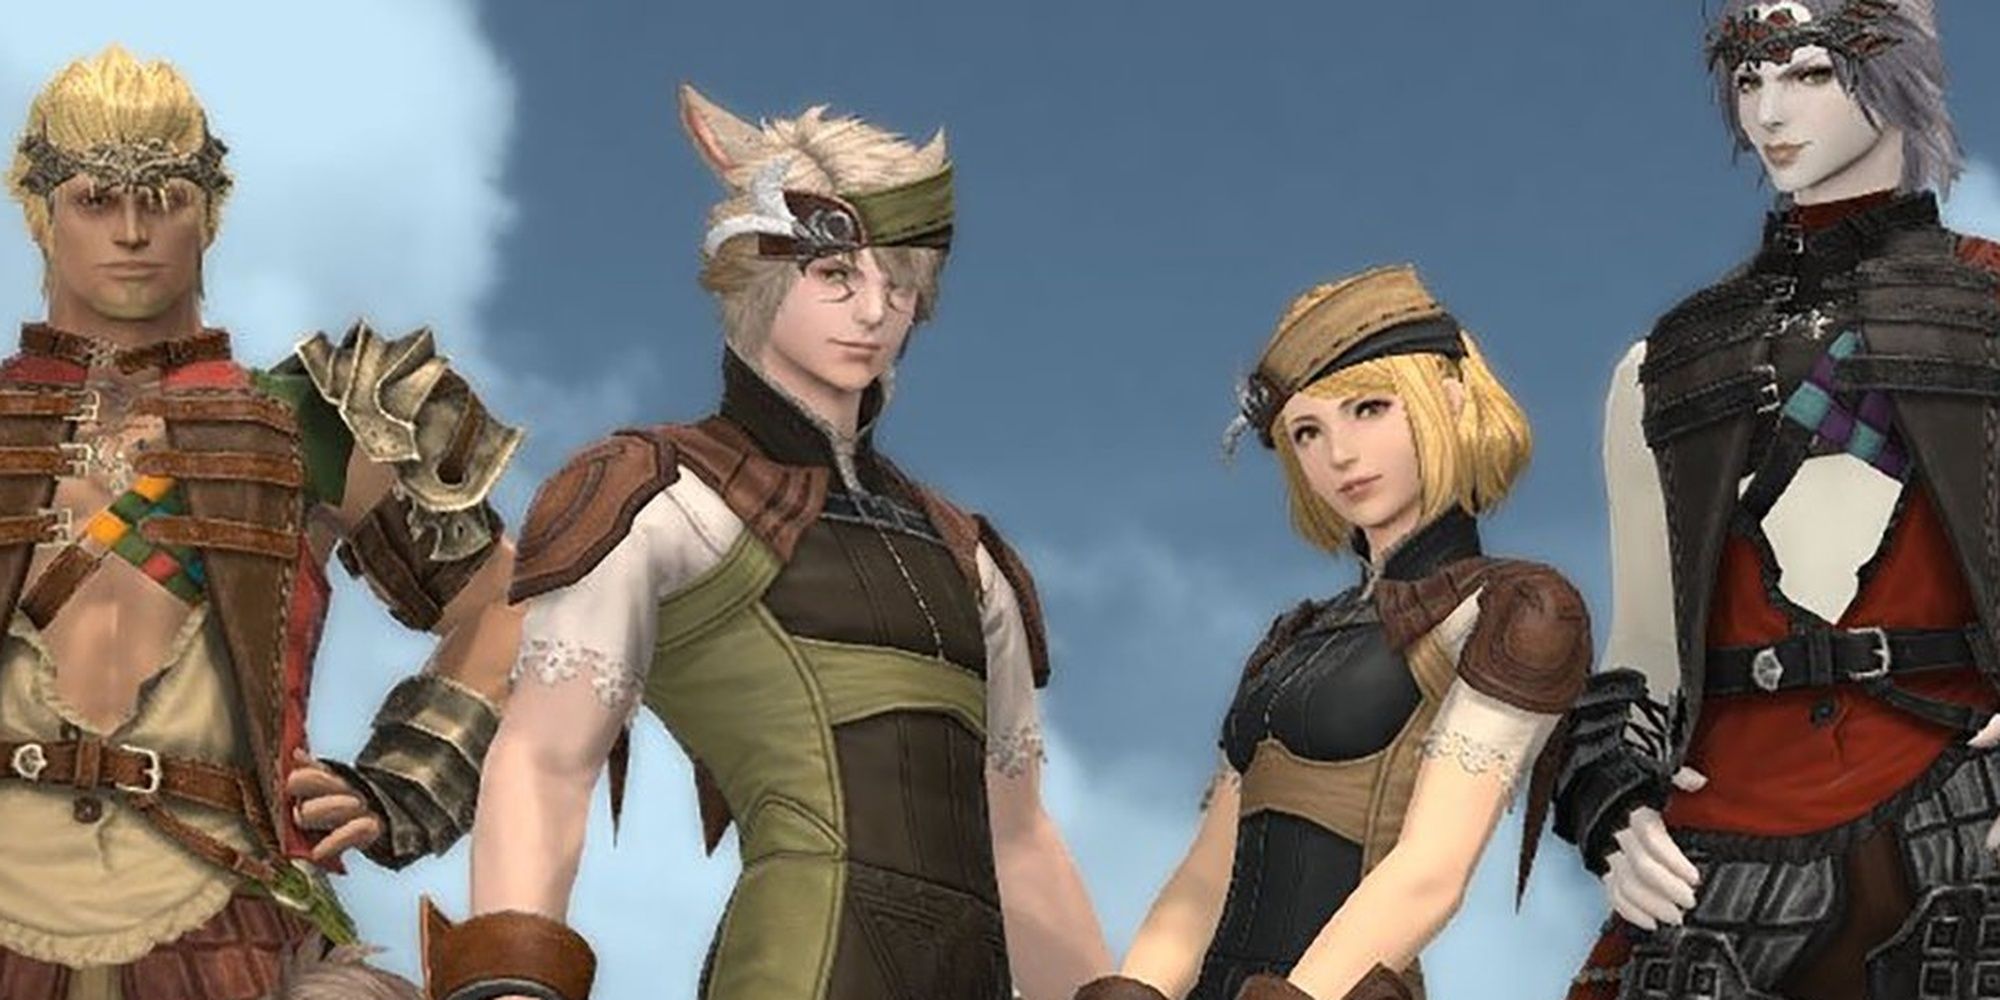 Final Fantasy 14 Four Characters in Zadnor Armor Against a Sky Blue Backdrop